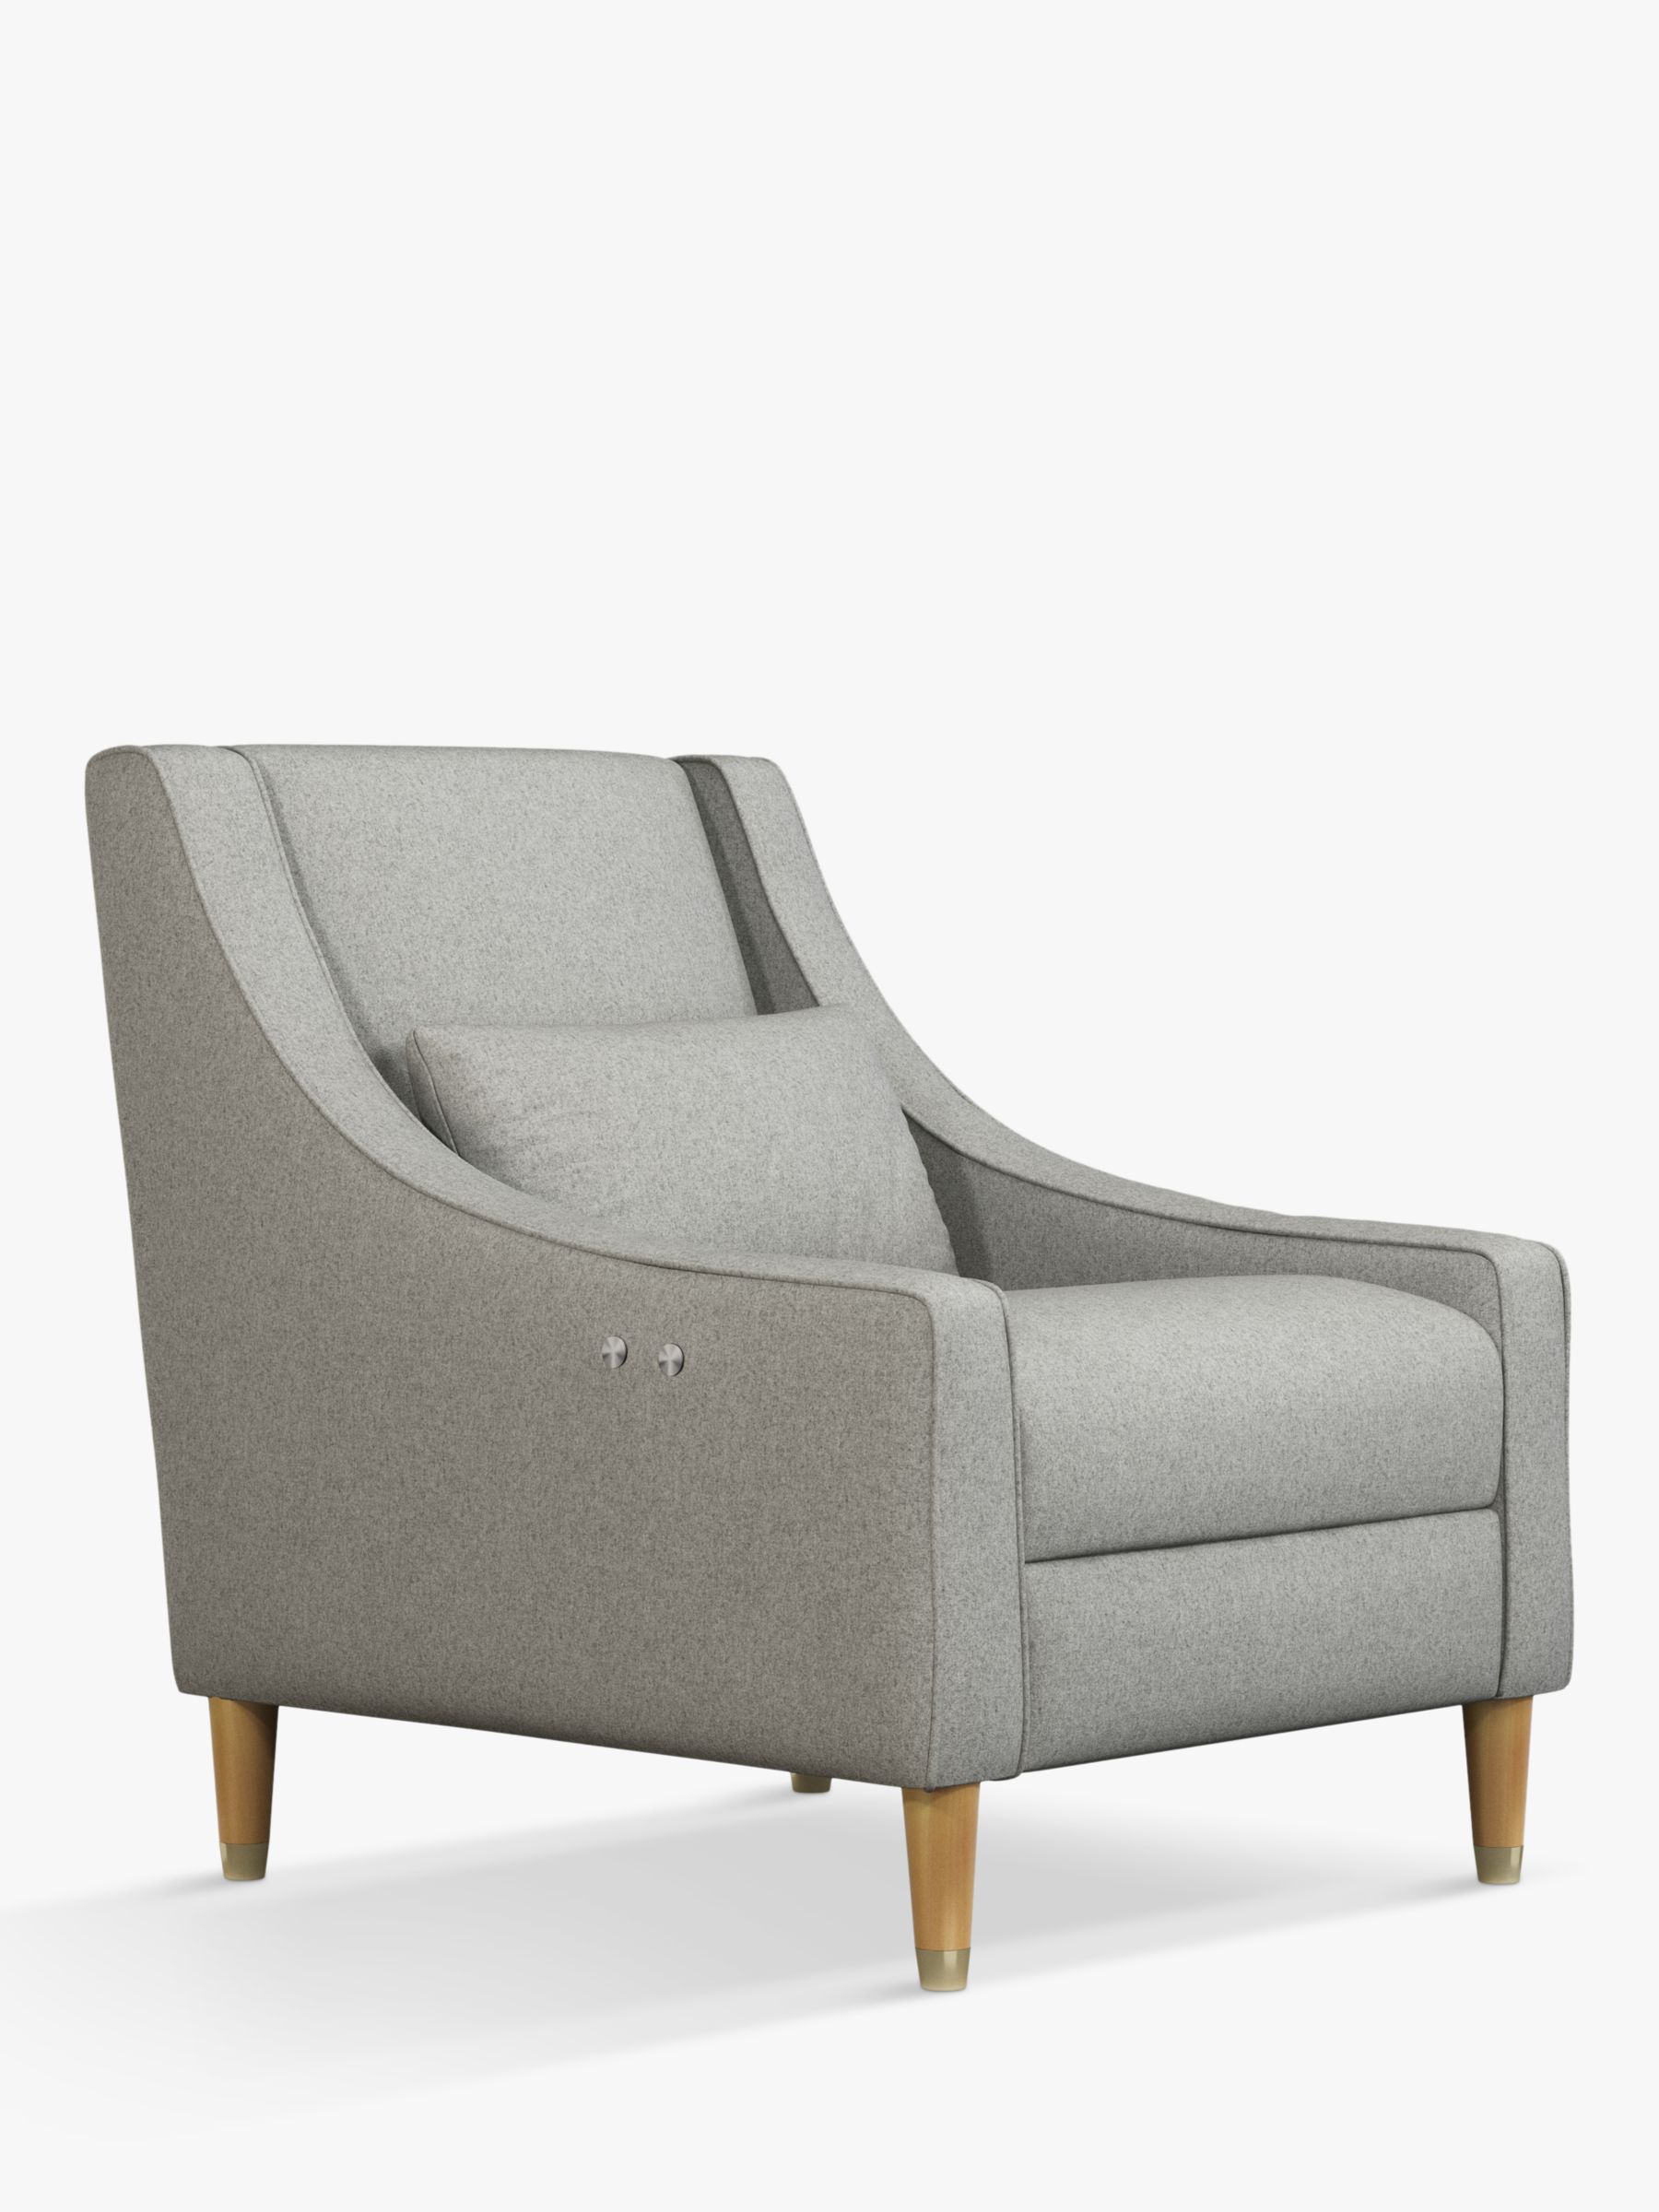 Photo of John lewis swept motion armchair with footrest mechanism